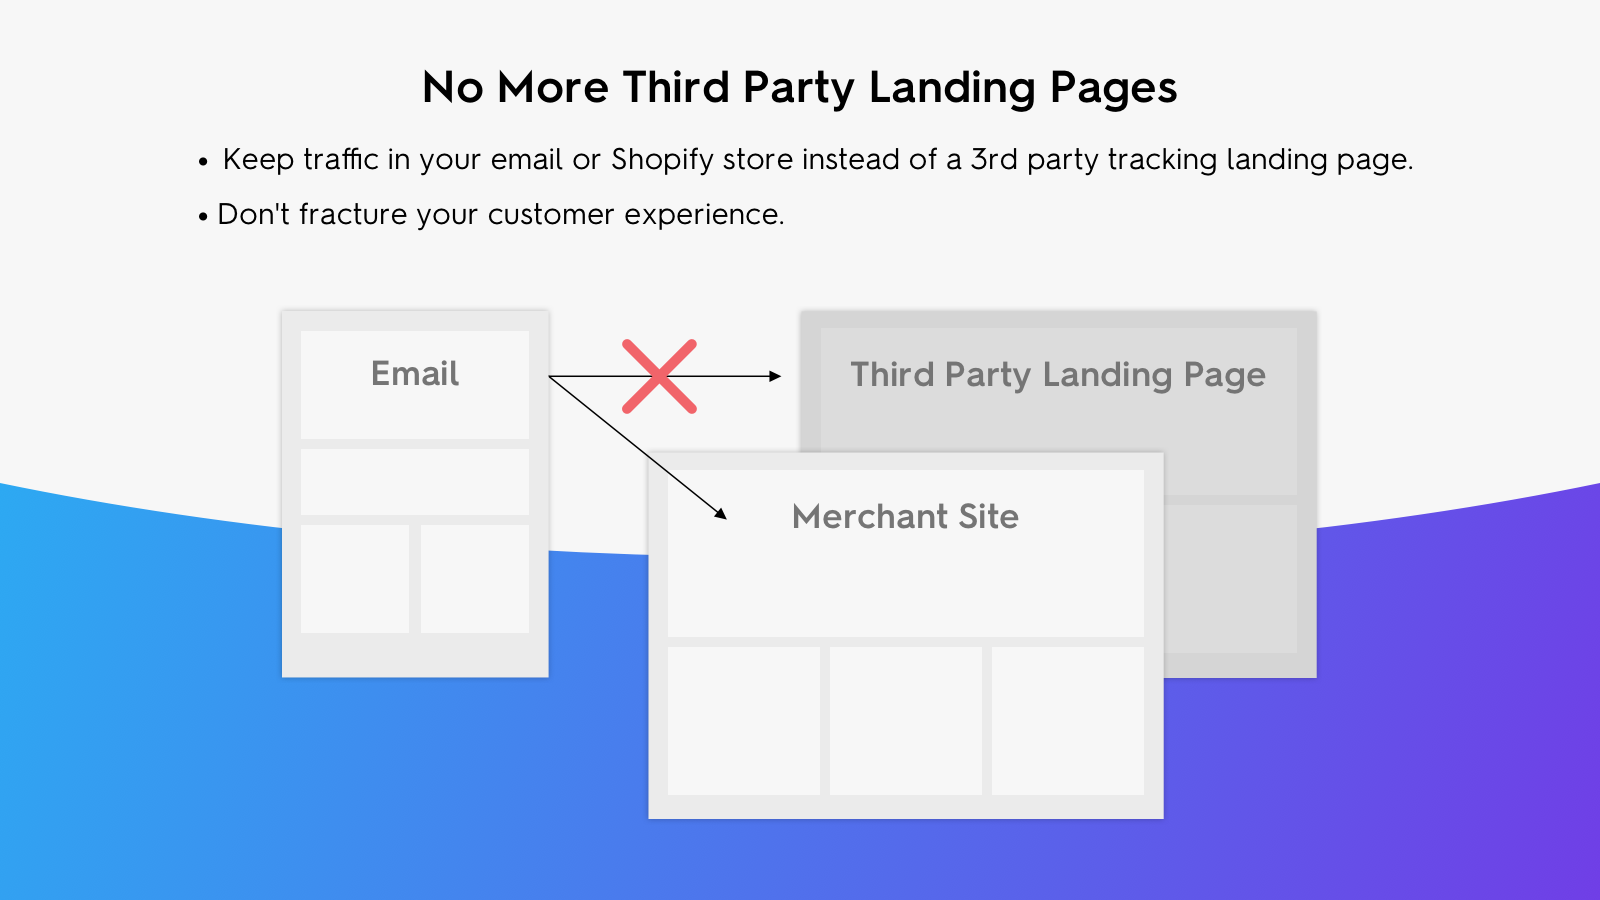 No more third party tracking landing pages.